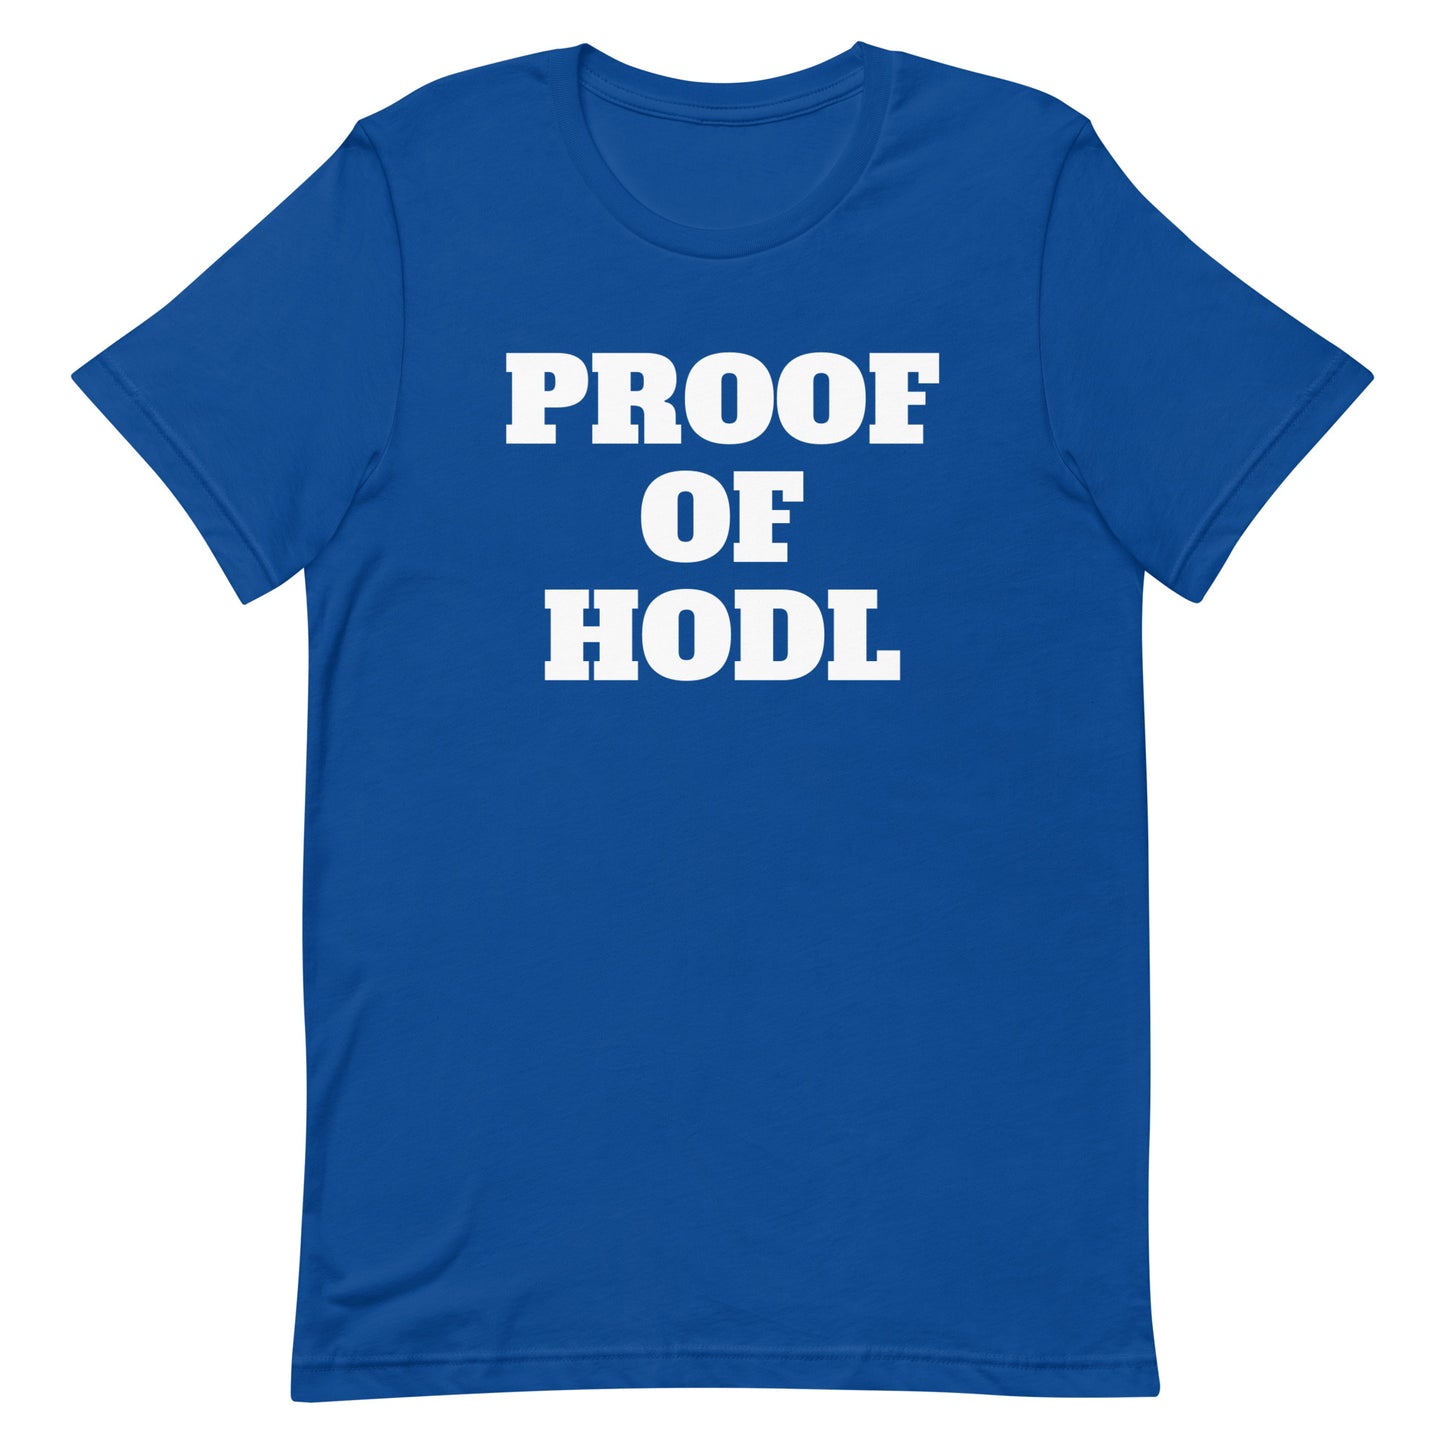 Proof of Hodl | Shirts & Tops | proof-of-hodl-tee | printful